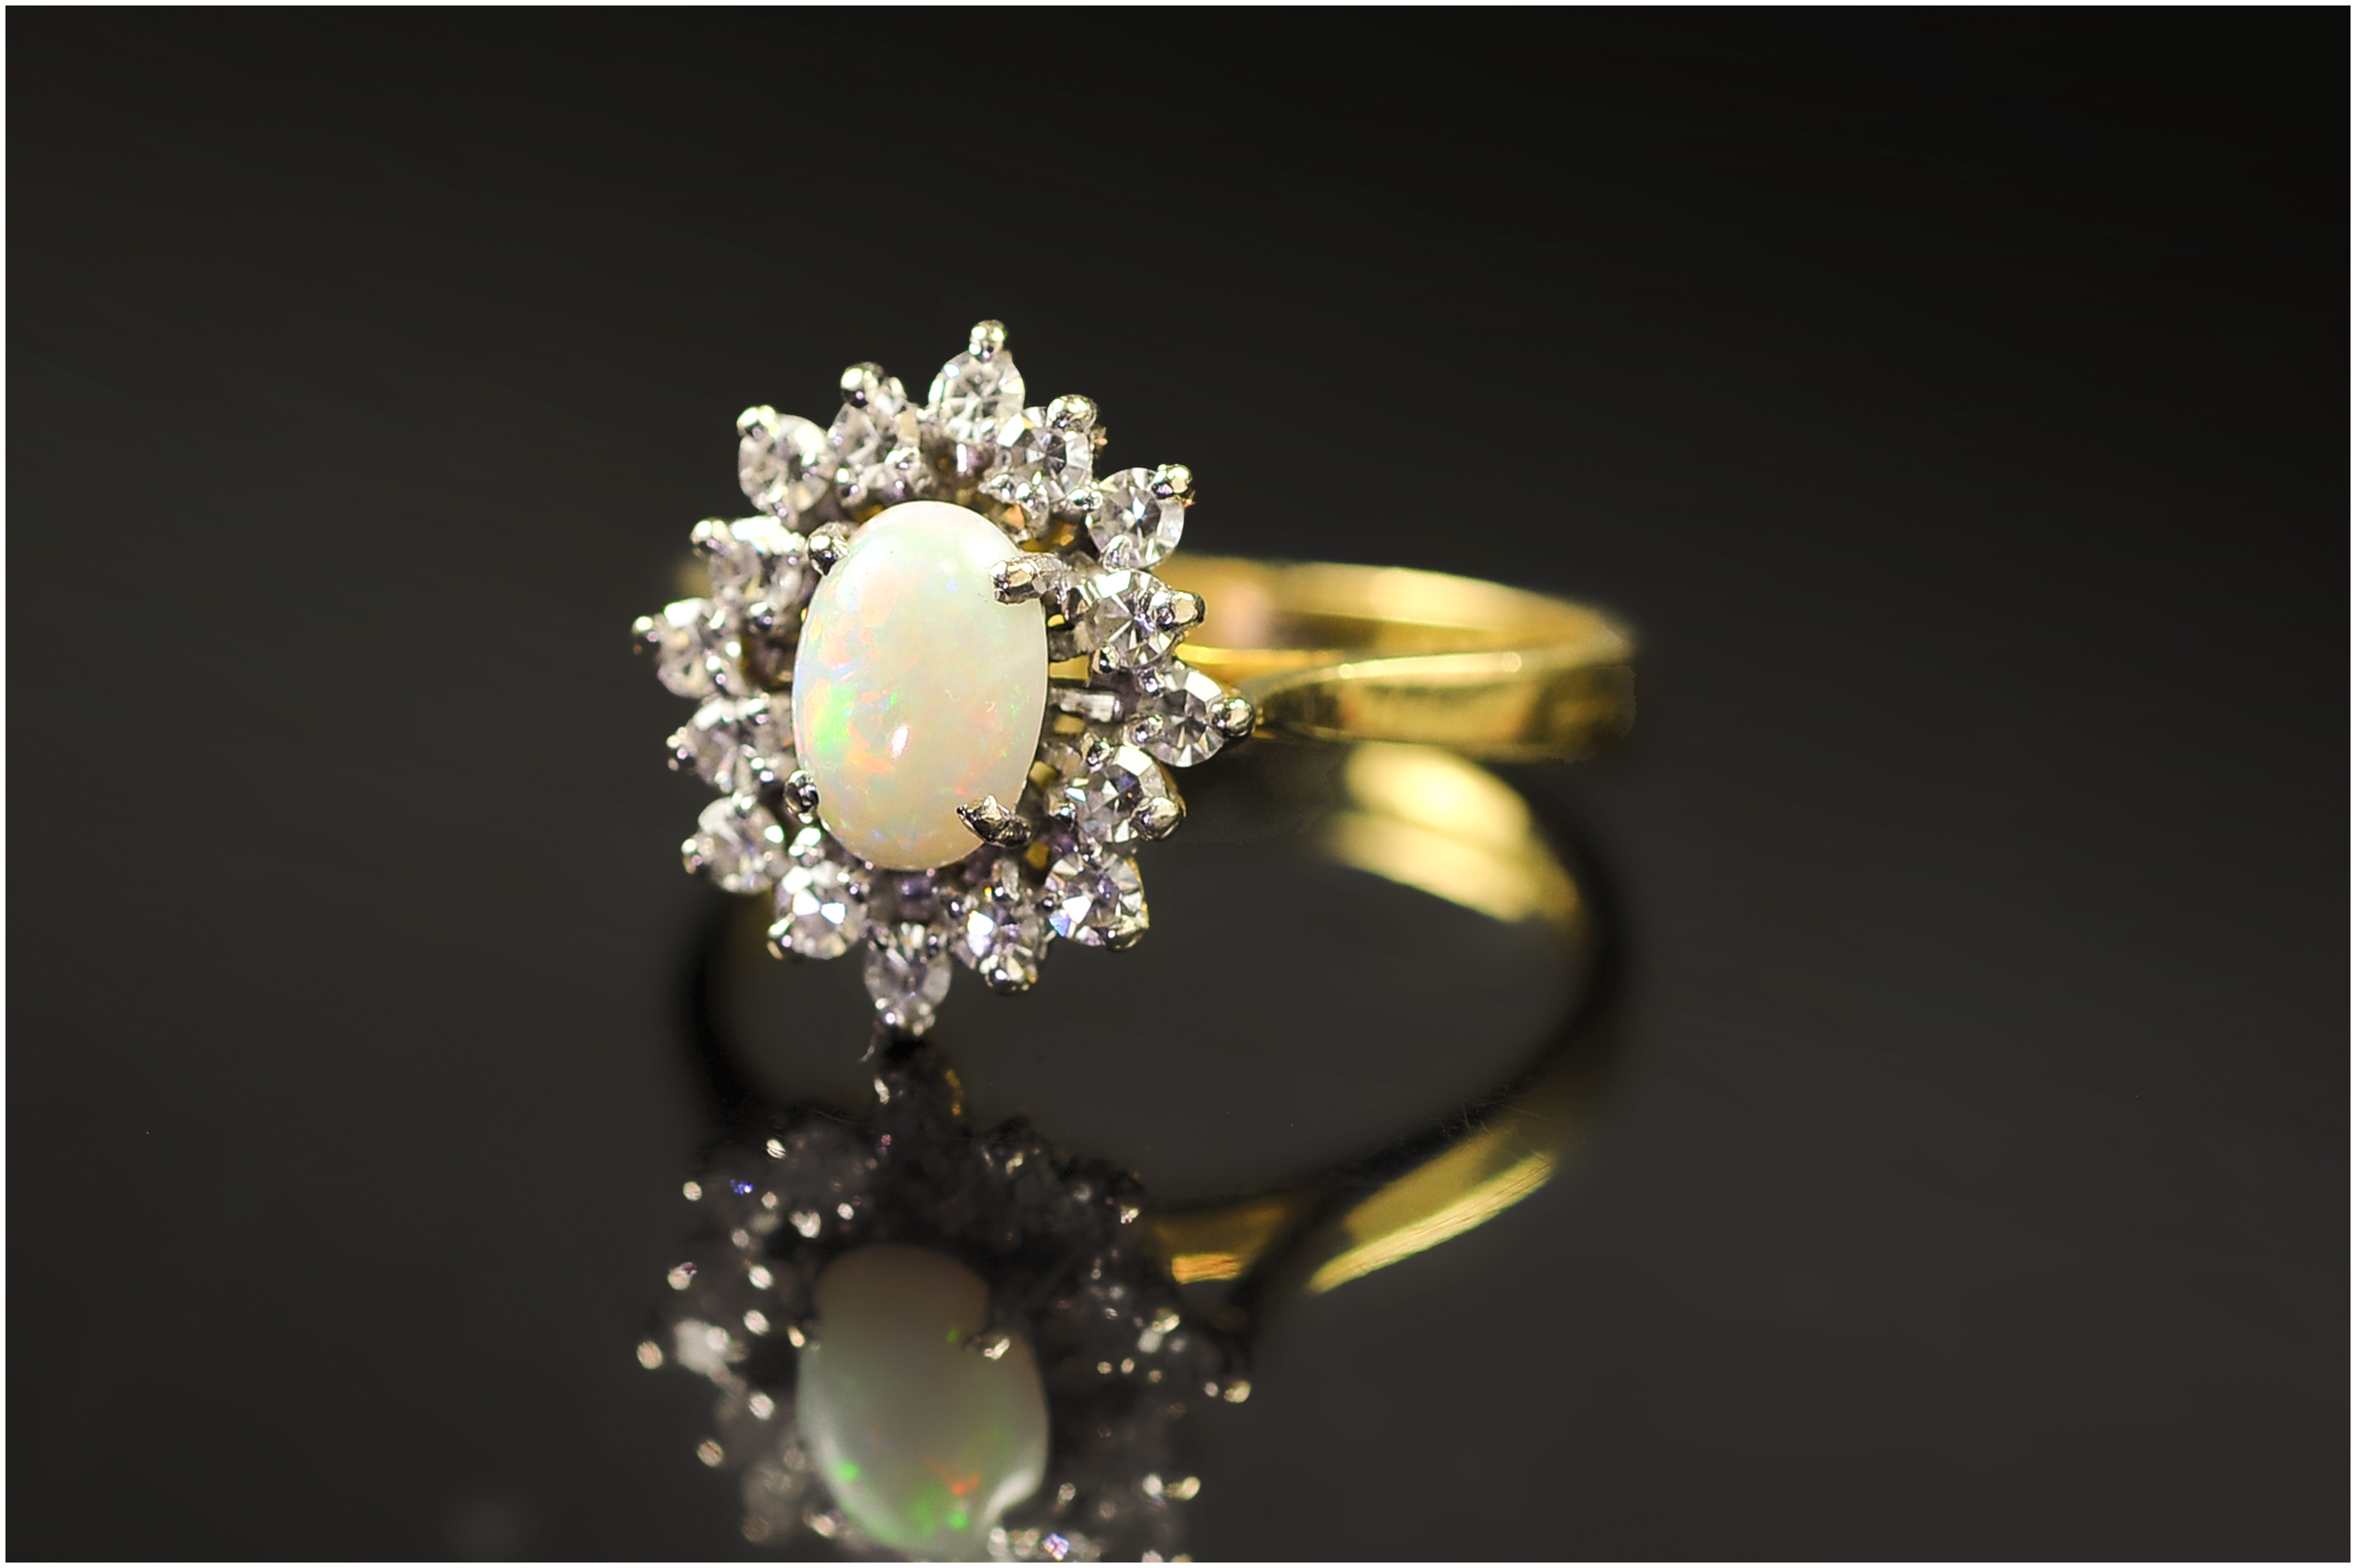 18ct Gold Diamond Dress Ring, Set With A Central Opal Surrounded By Round Cut Diamonds, Fully - Image 4 of 5